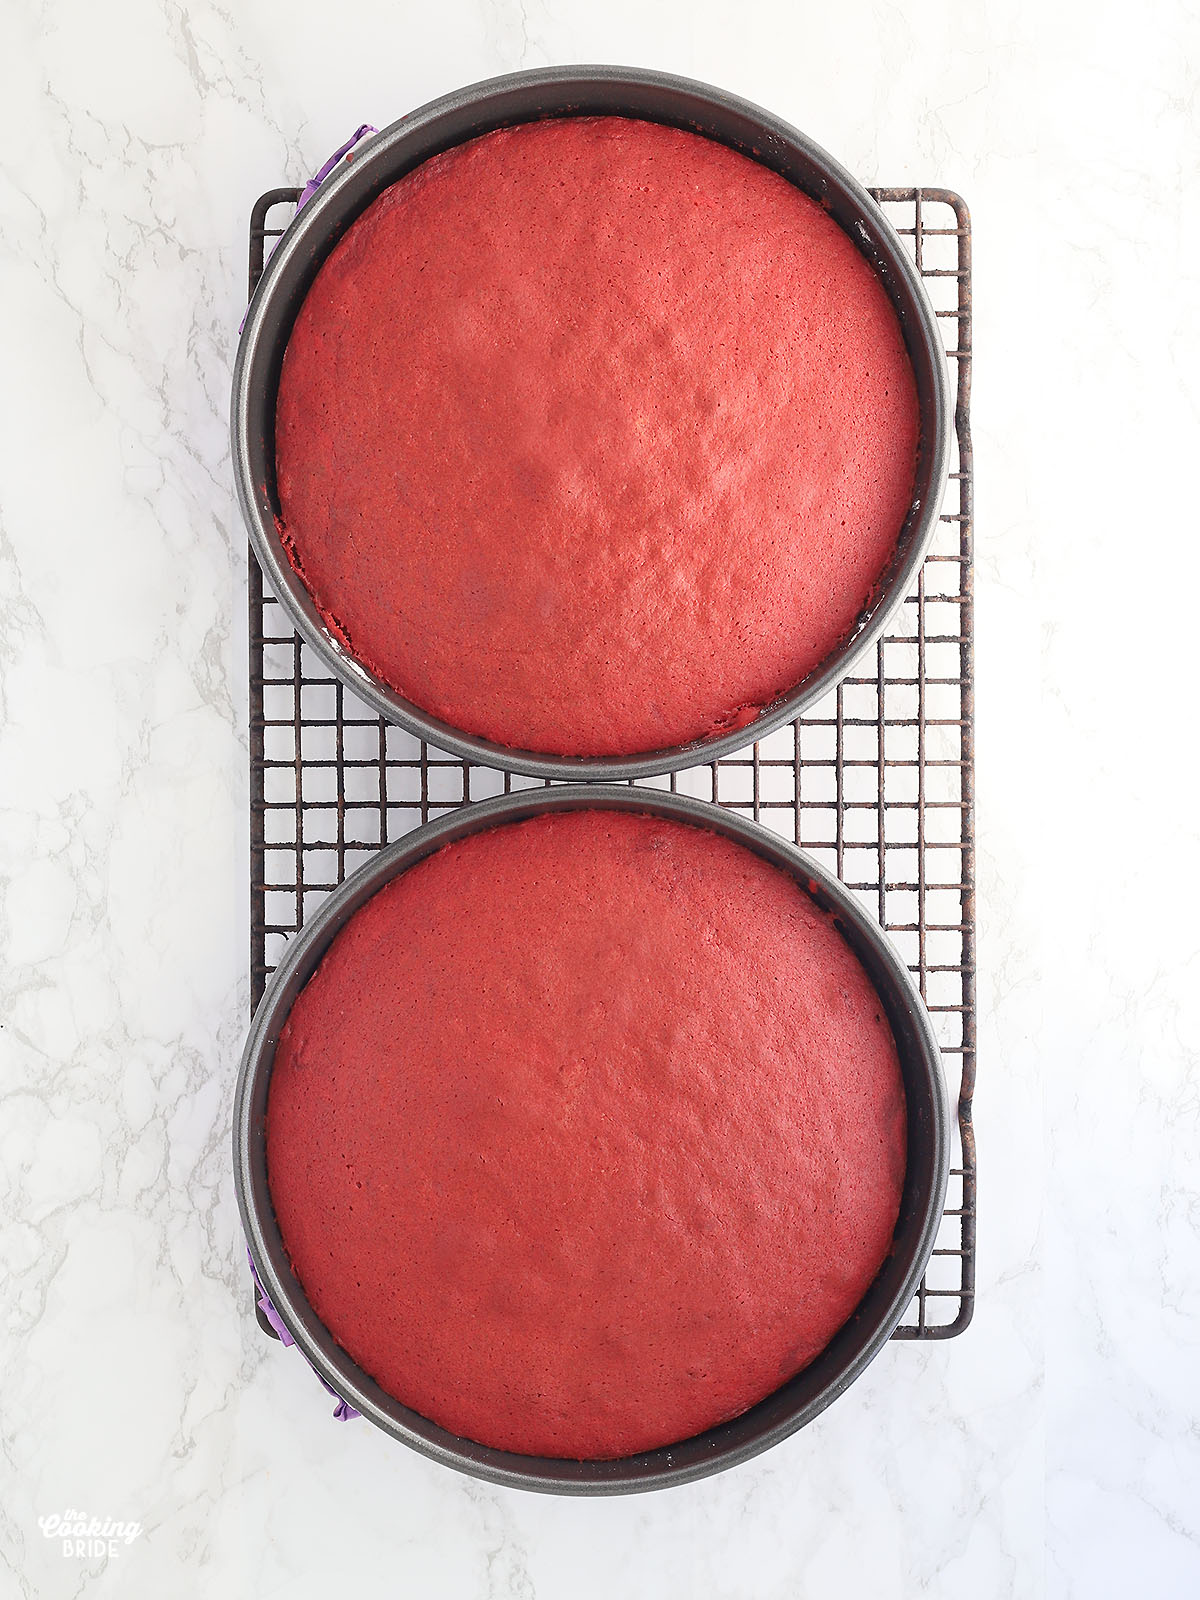 red velvet cake layers cooling in round cake pans on a wire rack